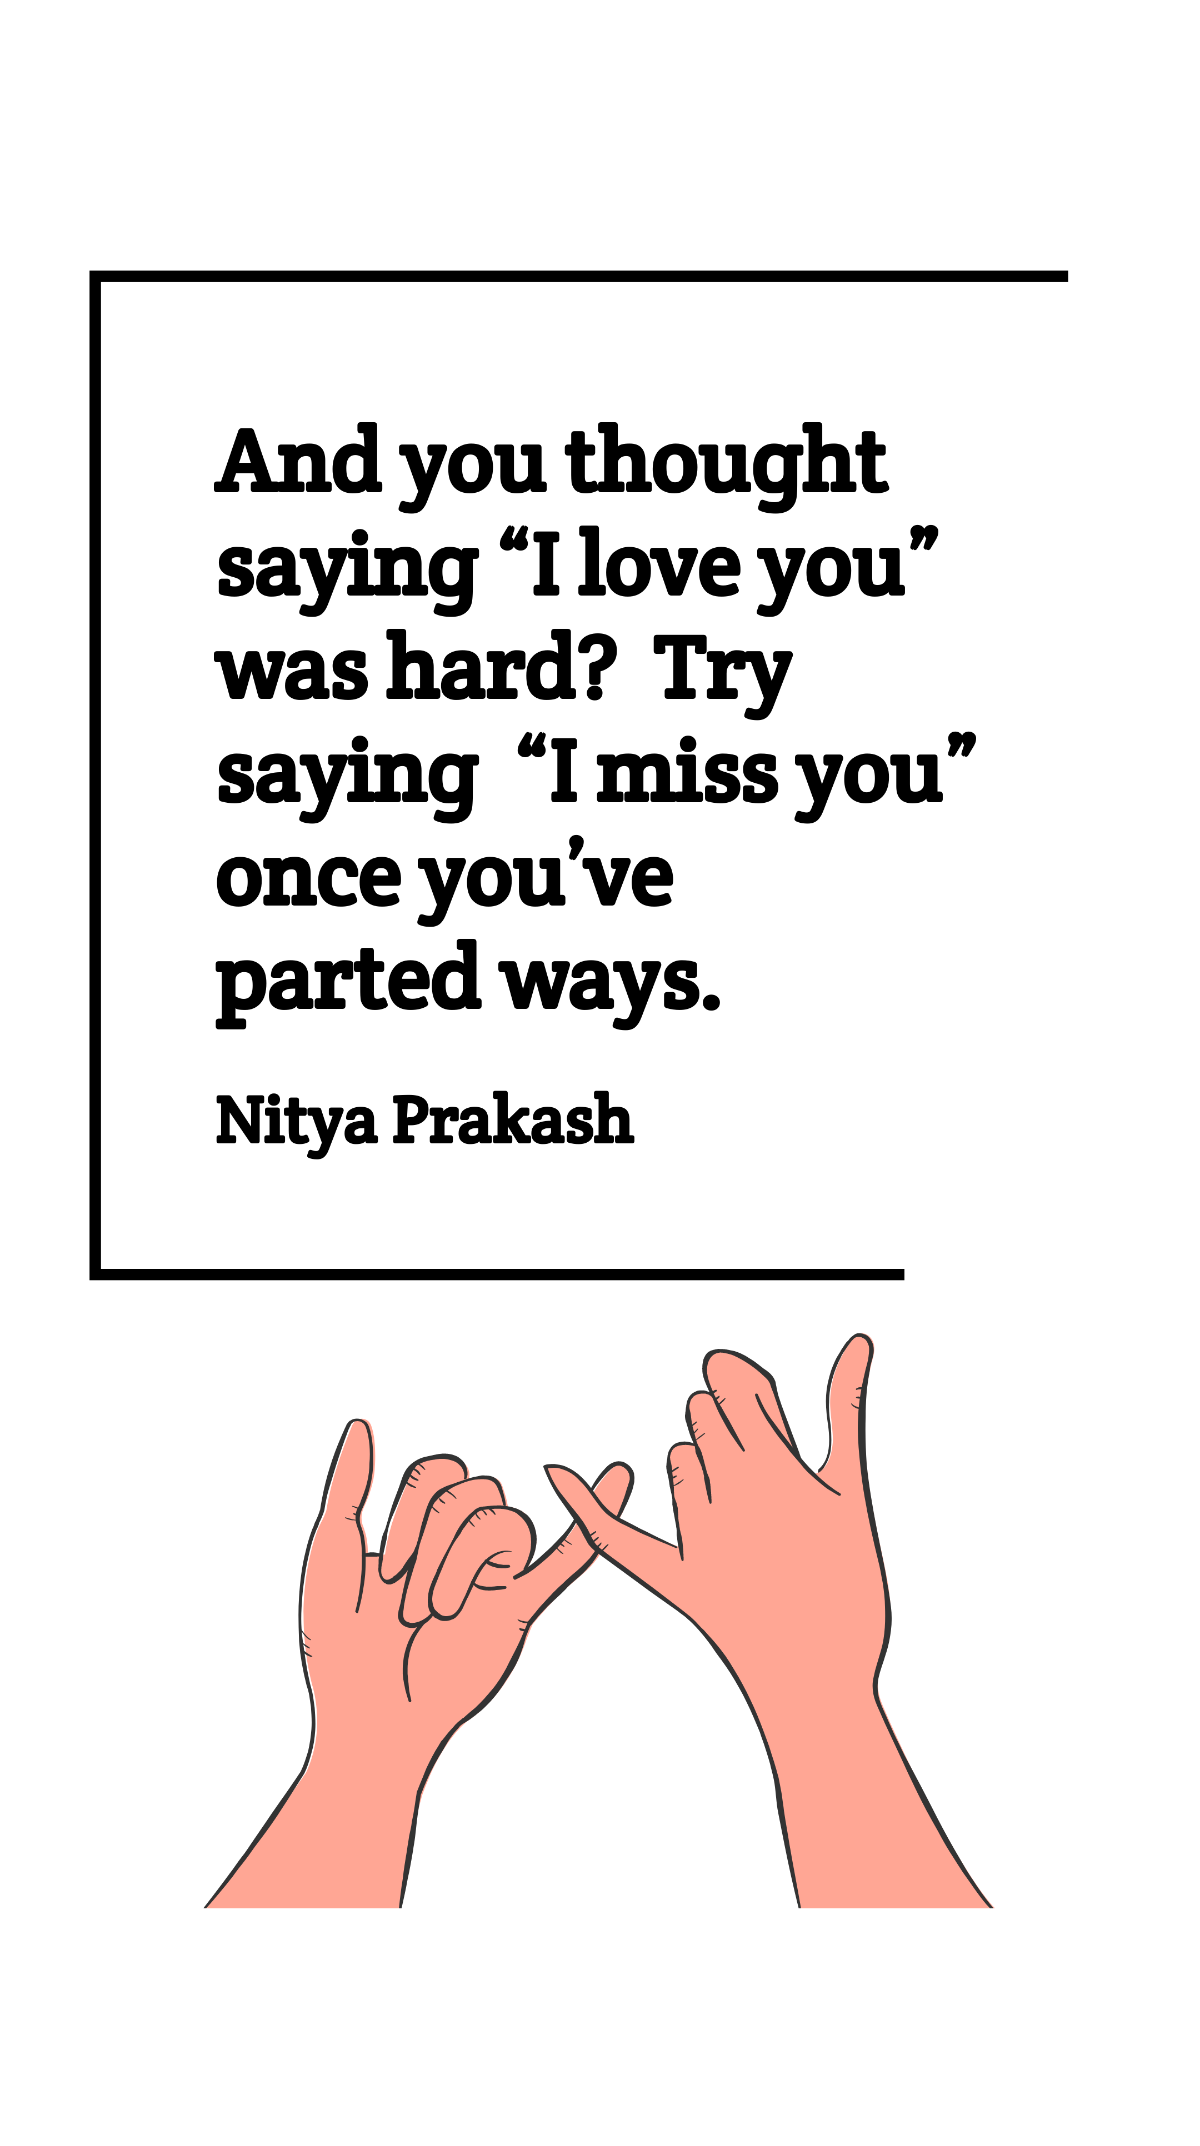 Free Nitya Prakash - And you thought saying “I love you” was hard? Try saying “I miss you” once you’ve parted ways. Template